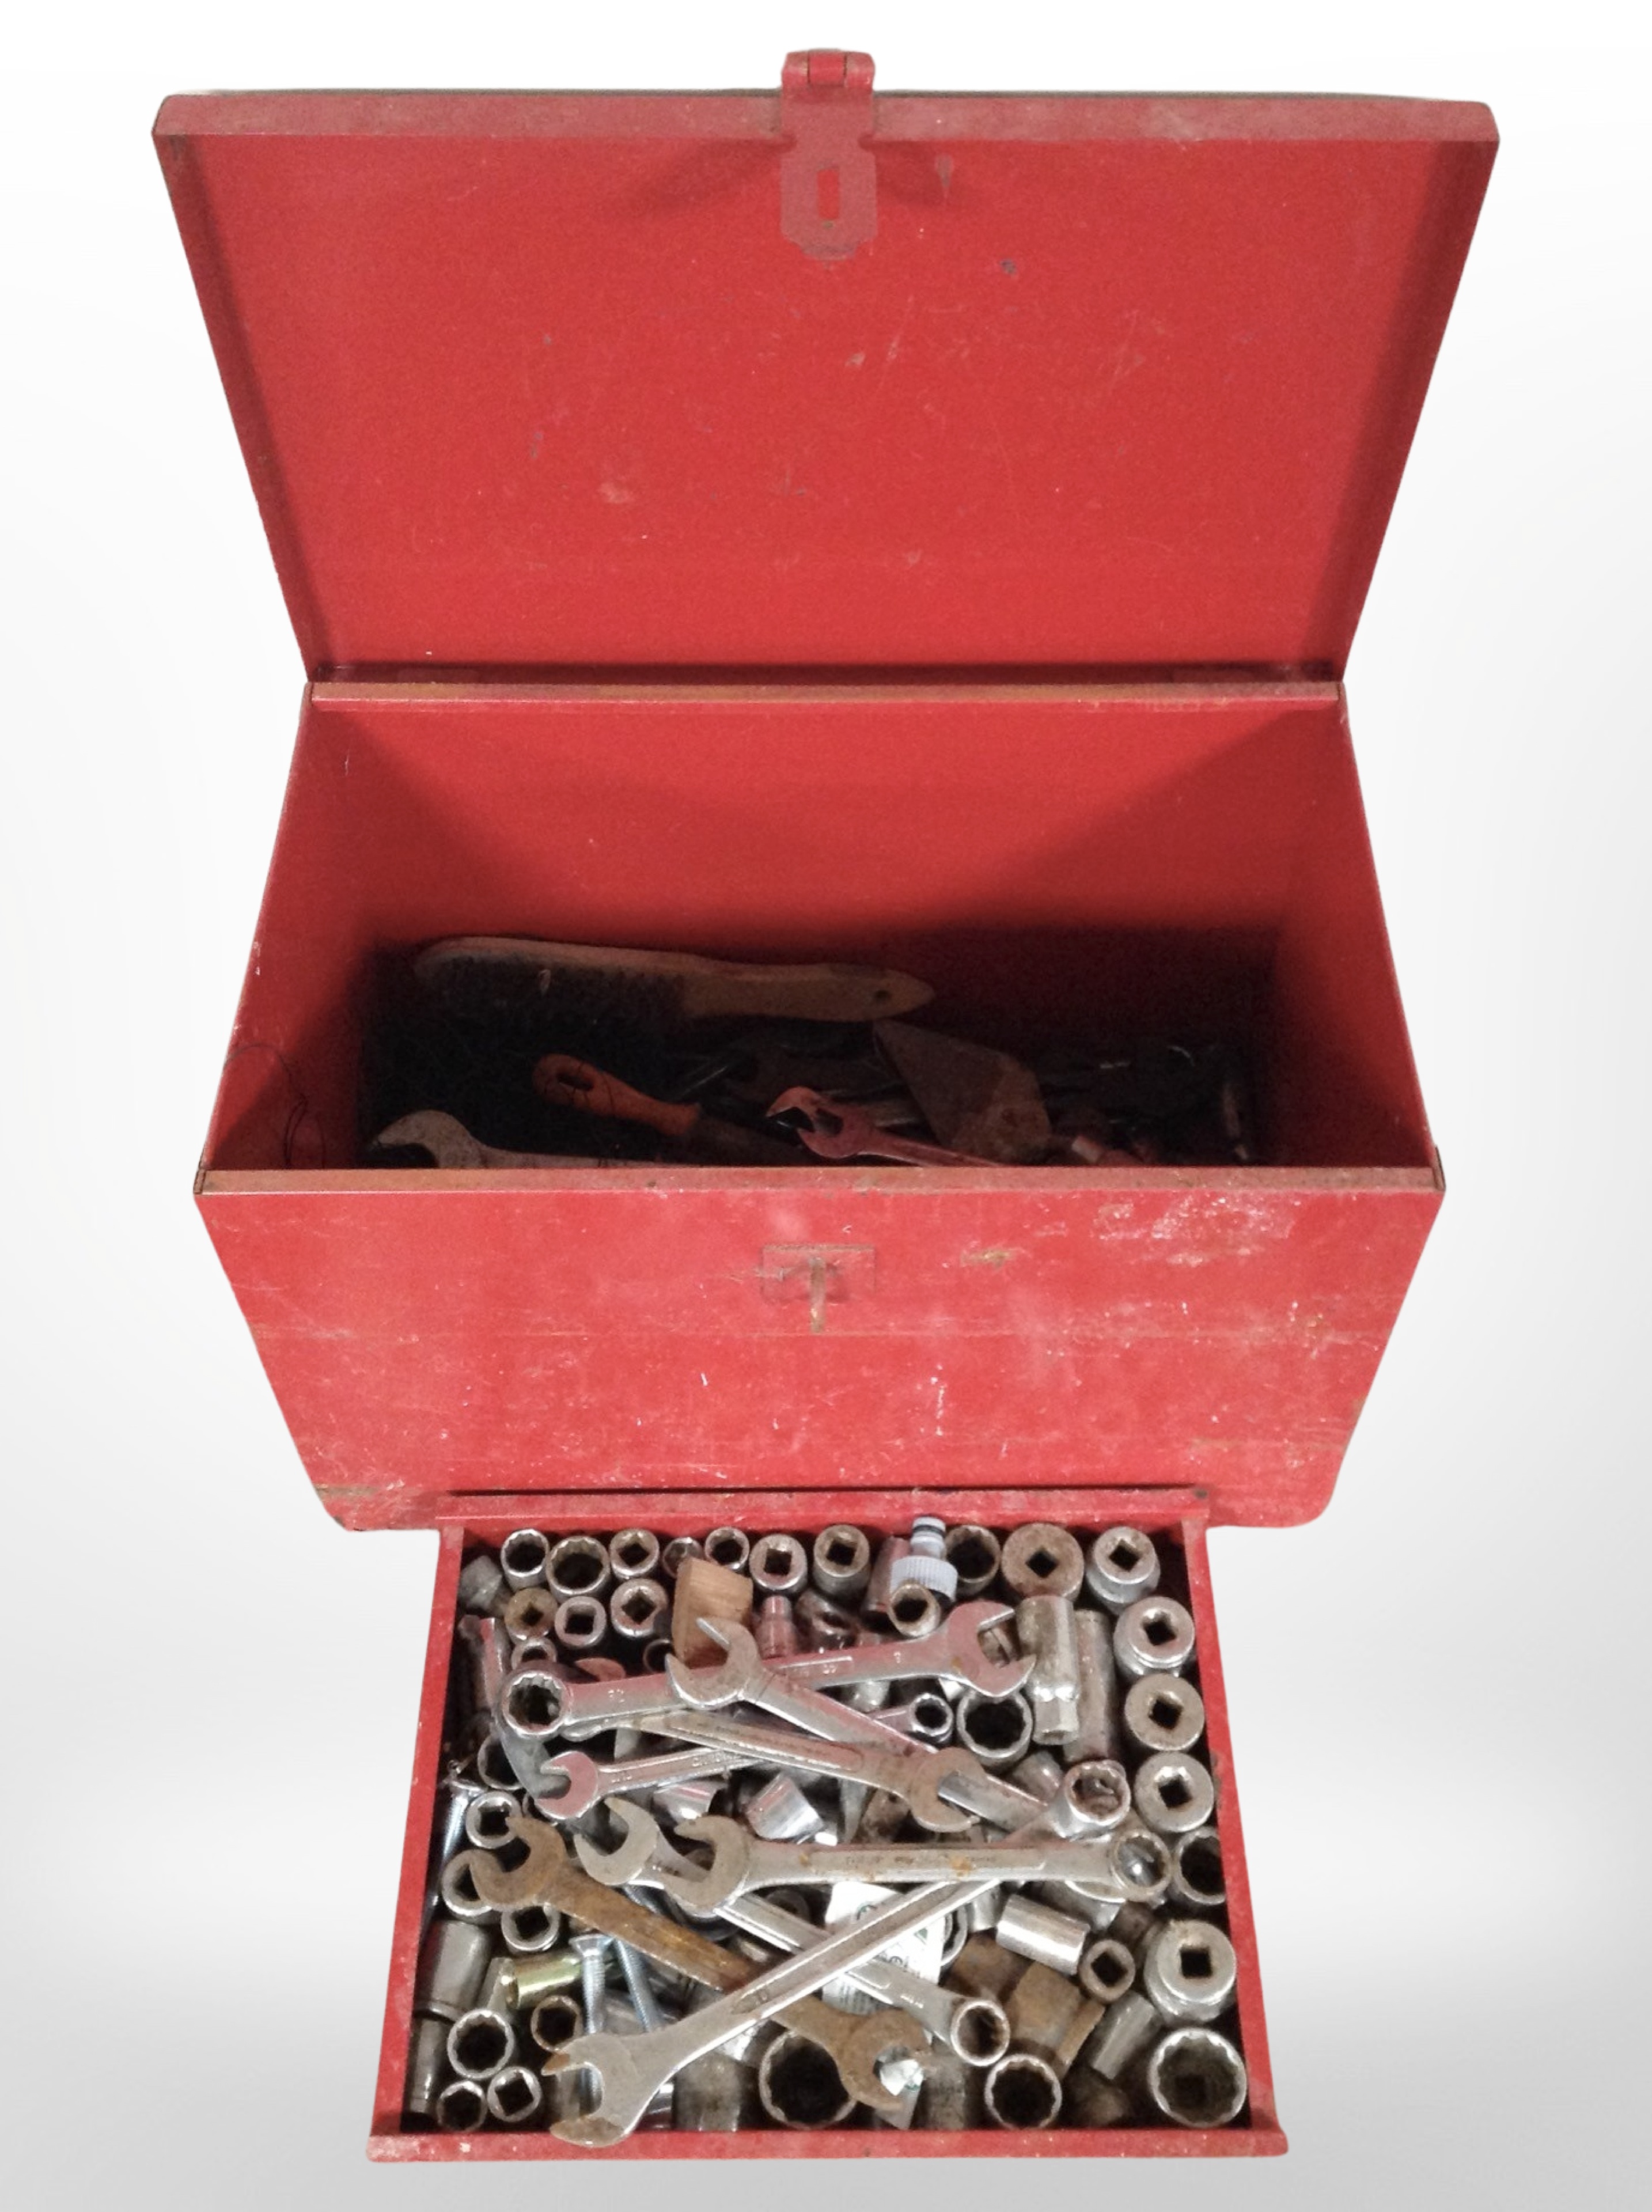 An enameled metal tool chest containing assorted hand tools, wrench sockets, etc. - Image 2 of 2